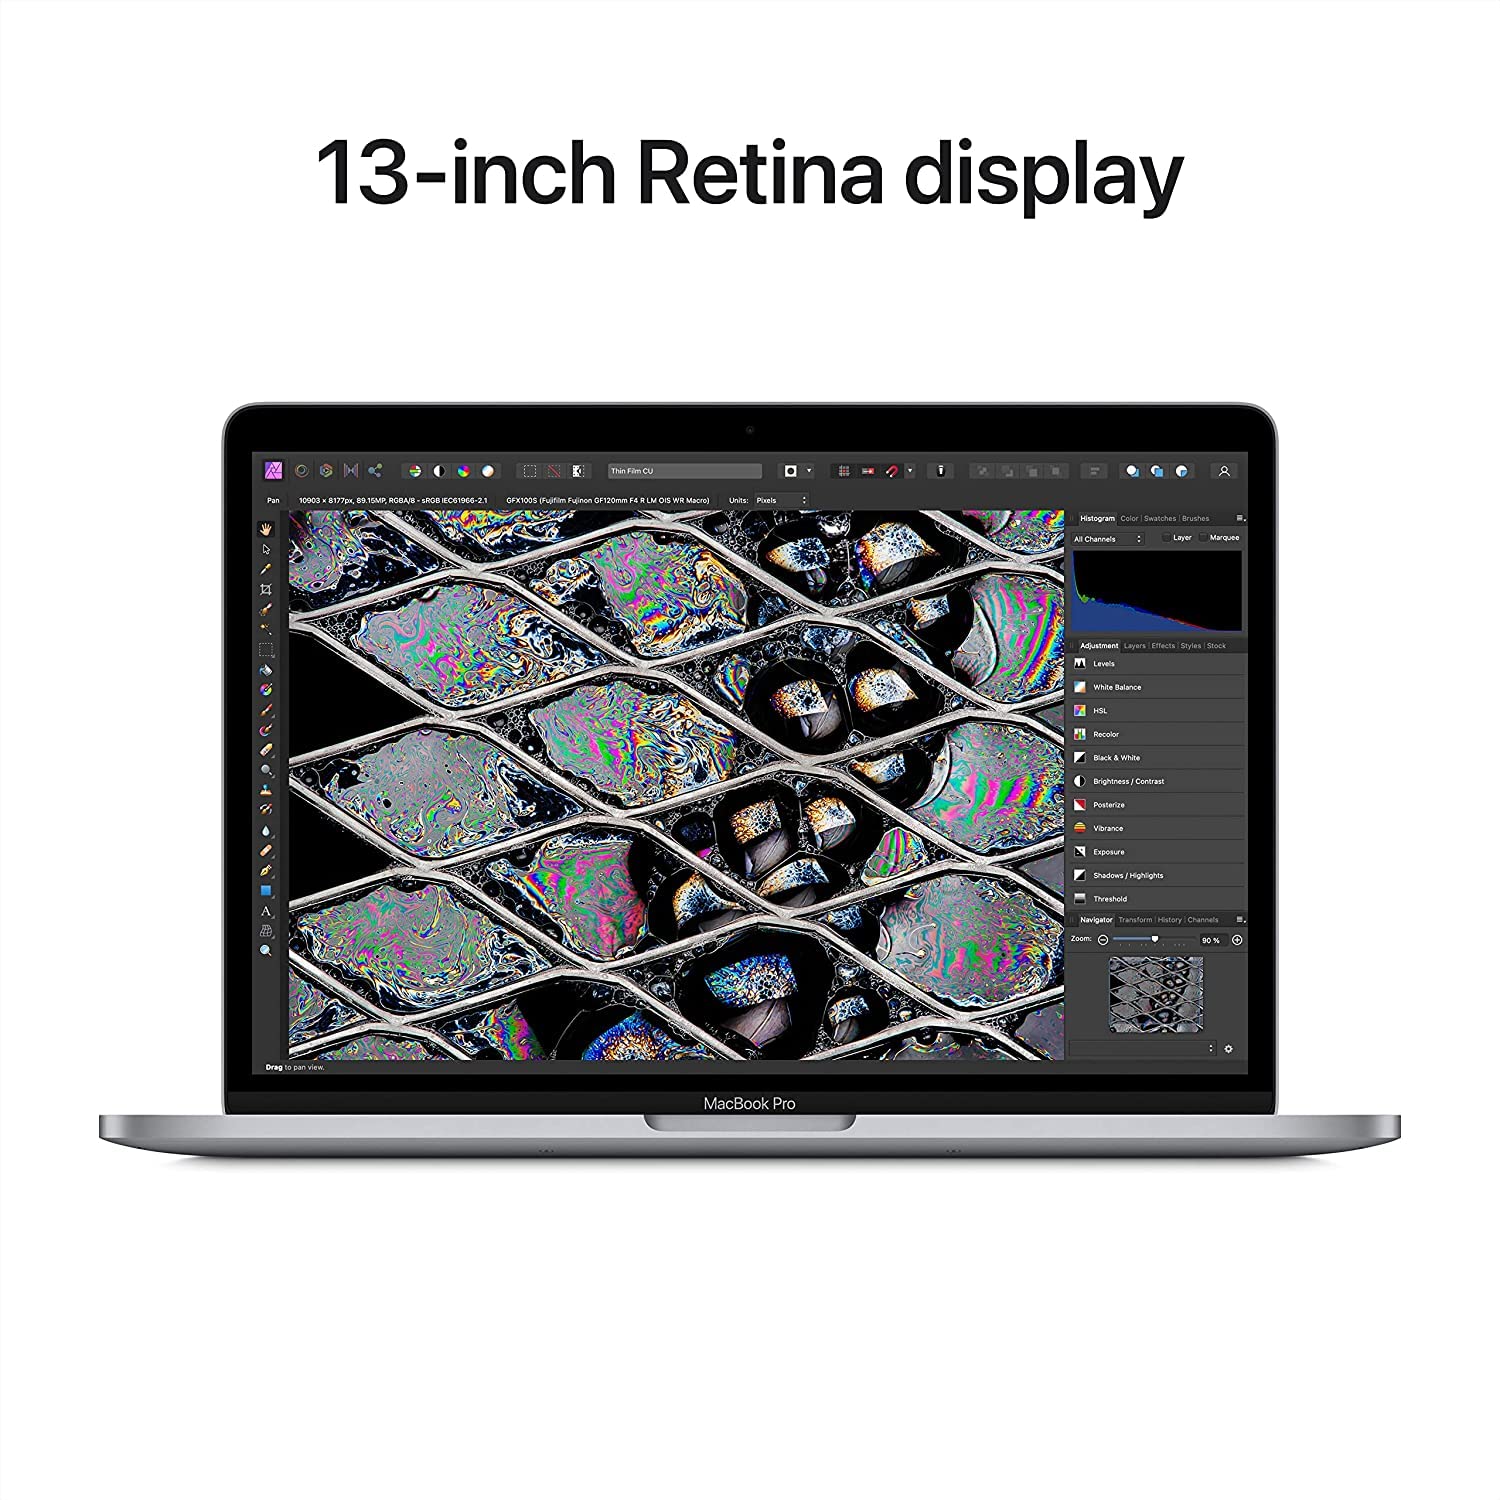 2022 Apple MacBook Pro Laptop with M2 chip: 13” Retina Display, 8GB RAM, 512GB SSD, Touch Bar, Backlit Keyboard, FaceTime HD Camera Space Gray (Renewed)